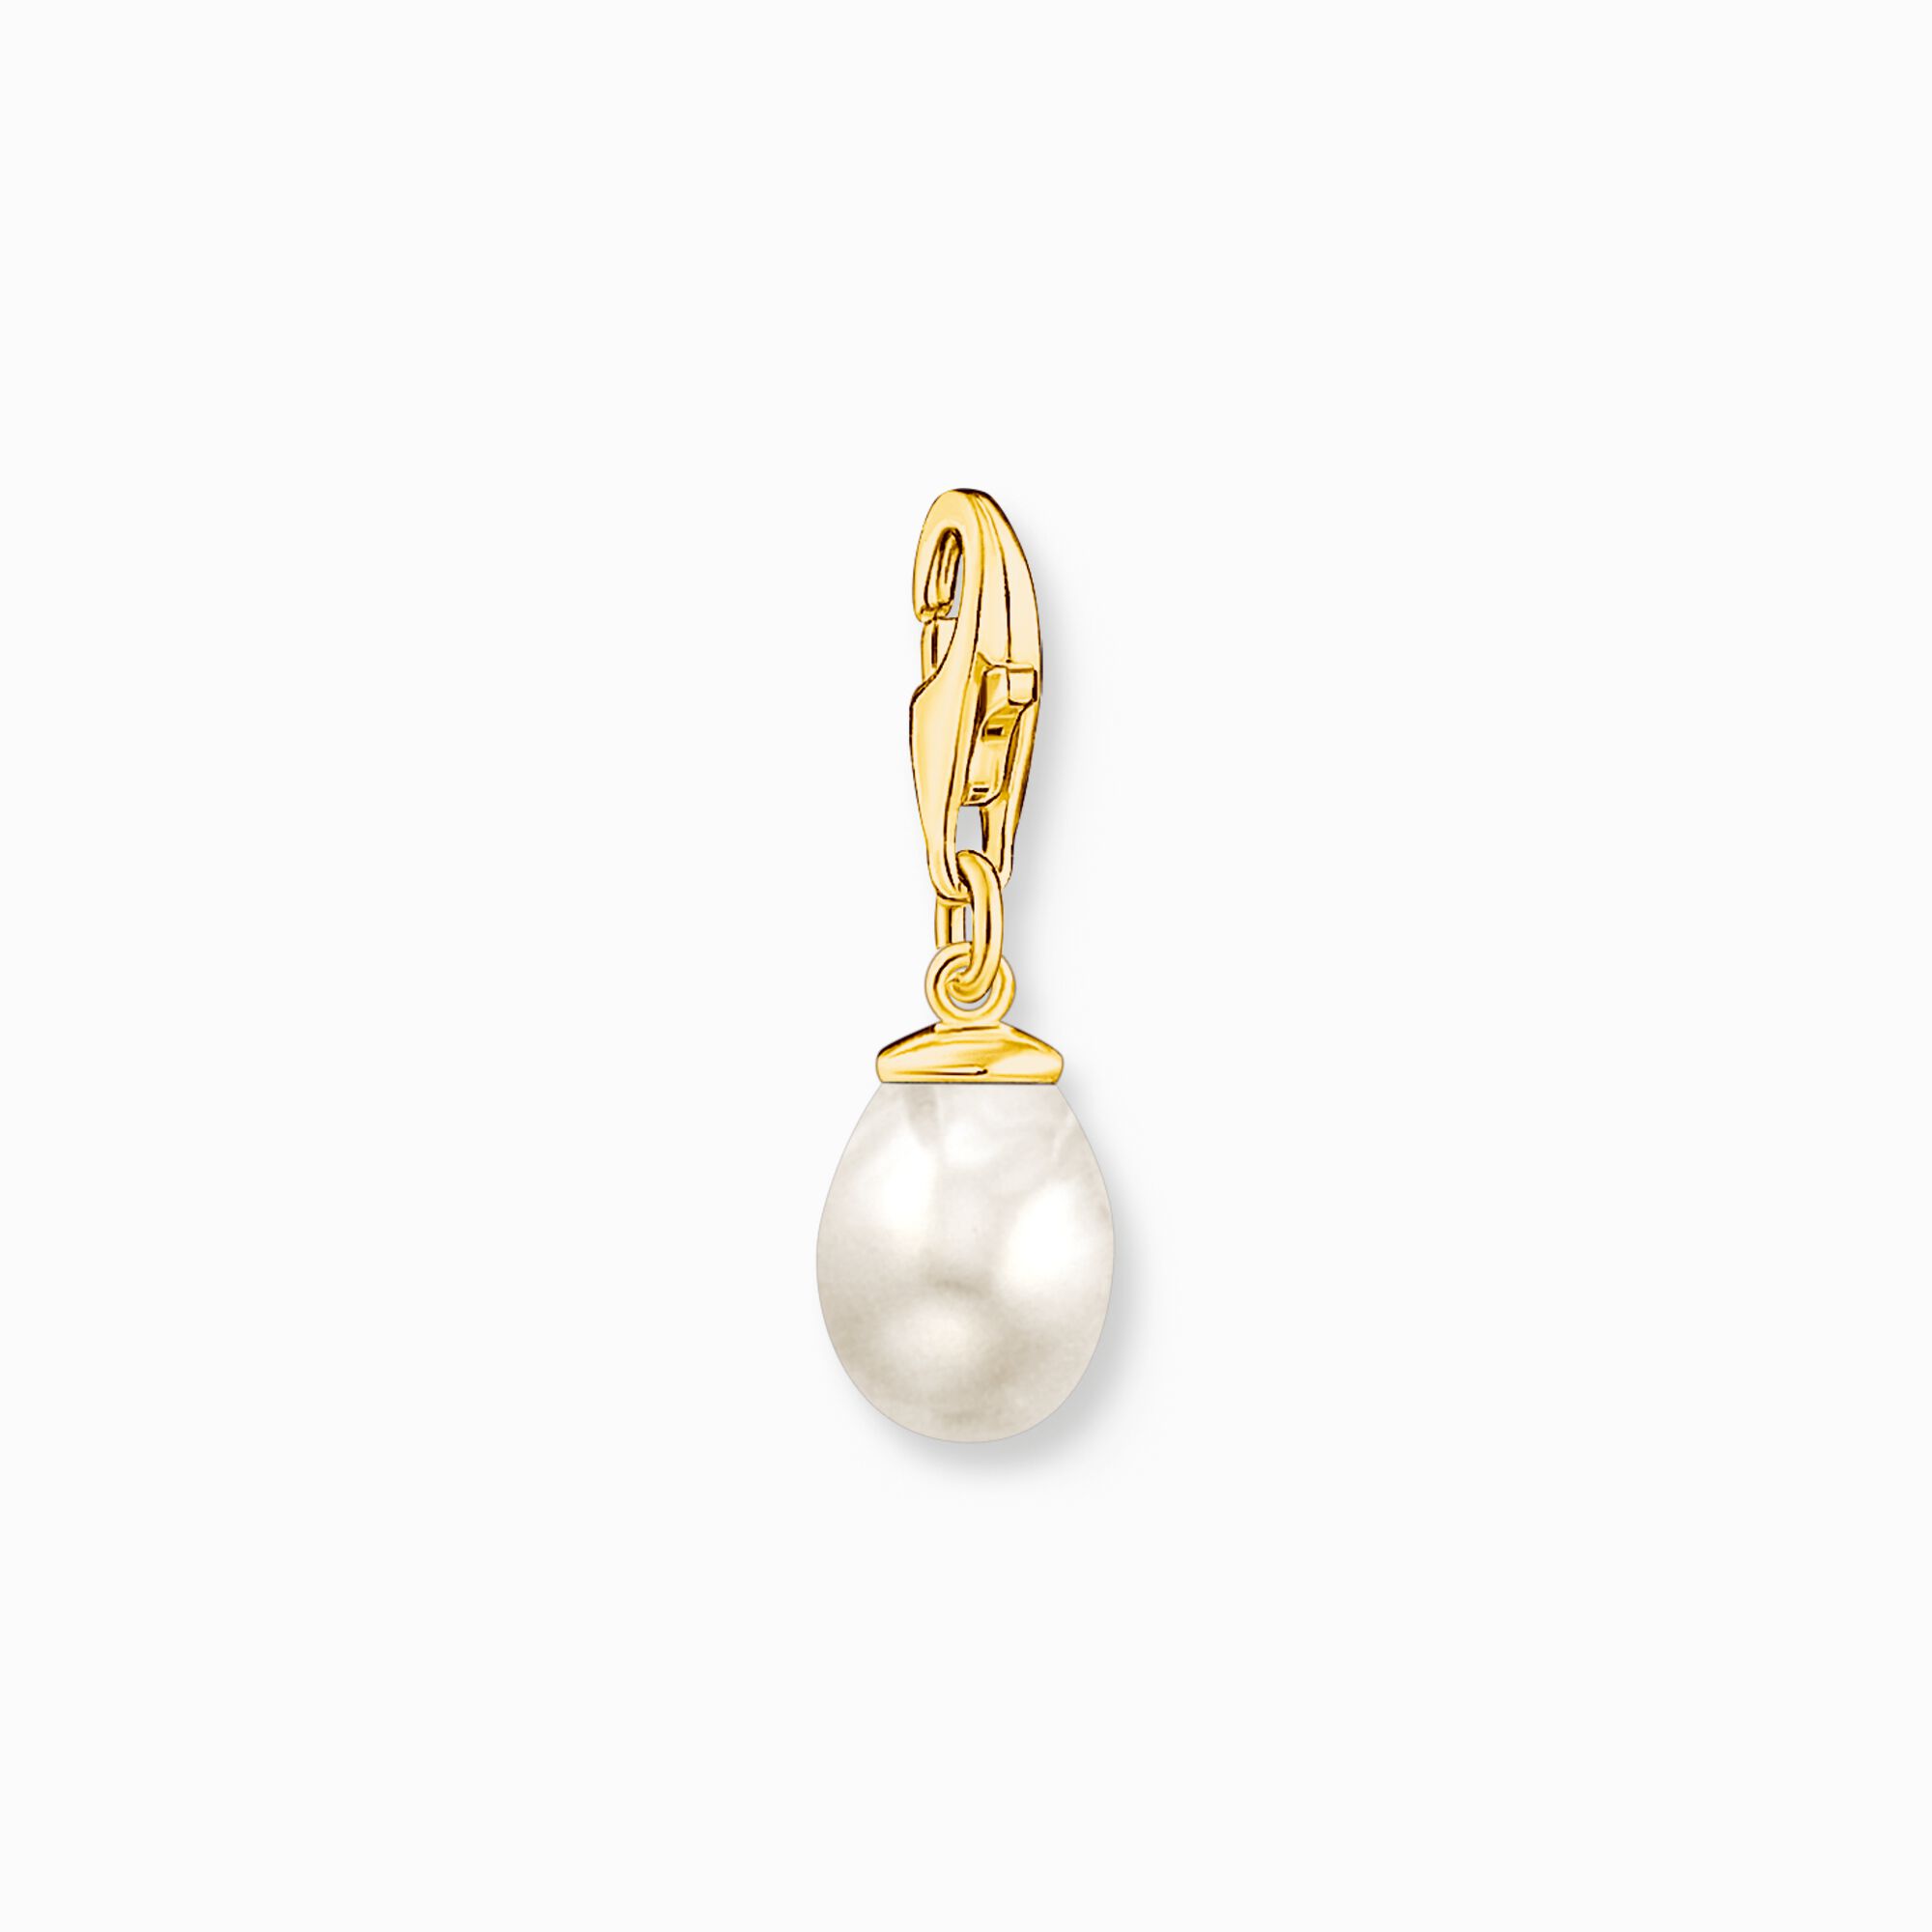 Charm pendant white pearl gold plated from the Charm Club collection in the THOMAS SABO online store